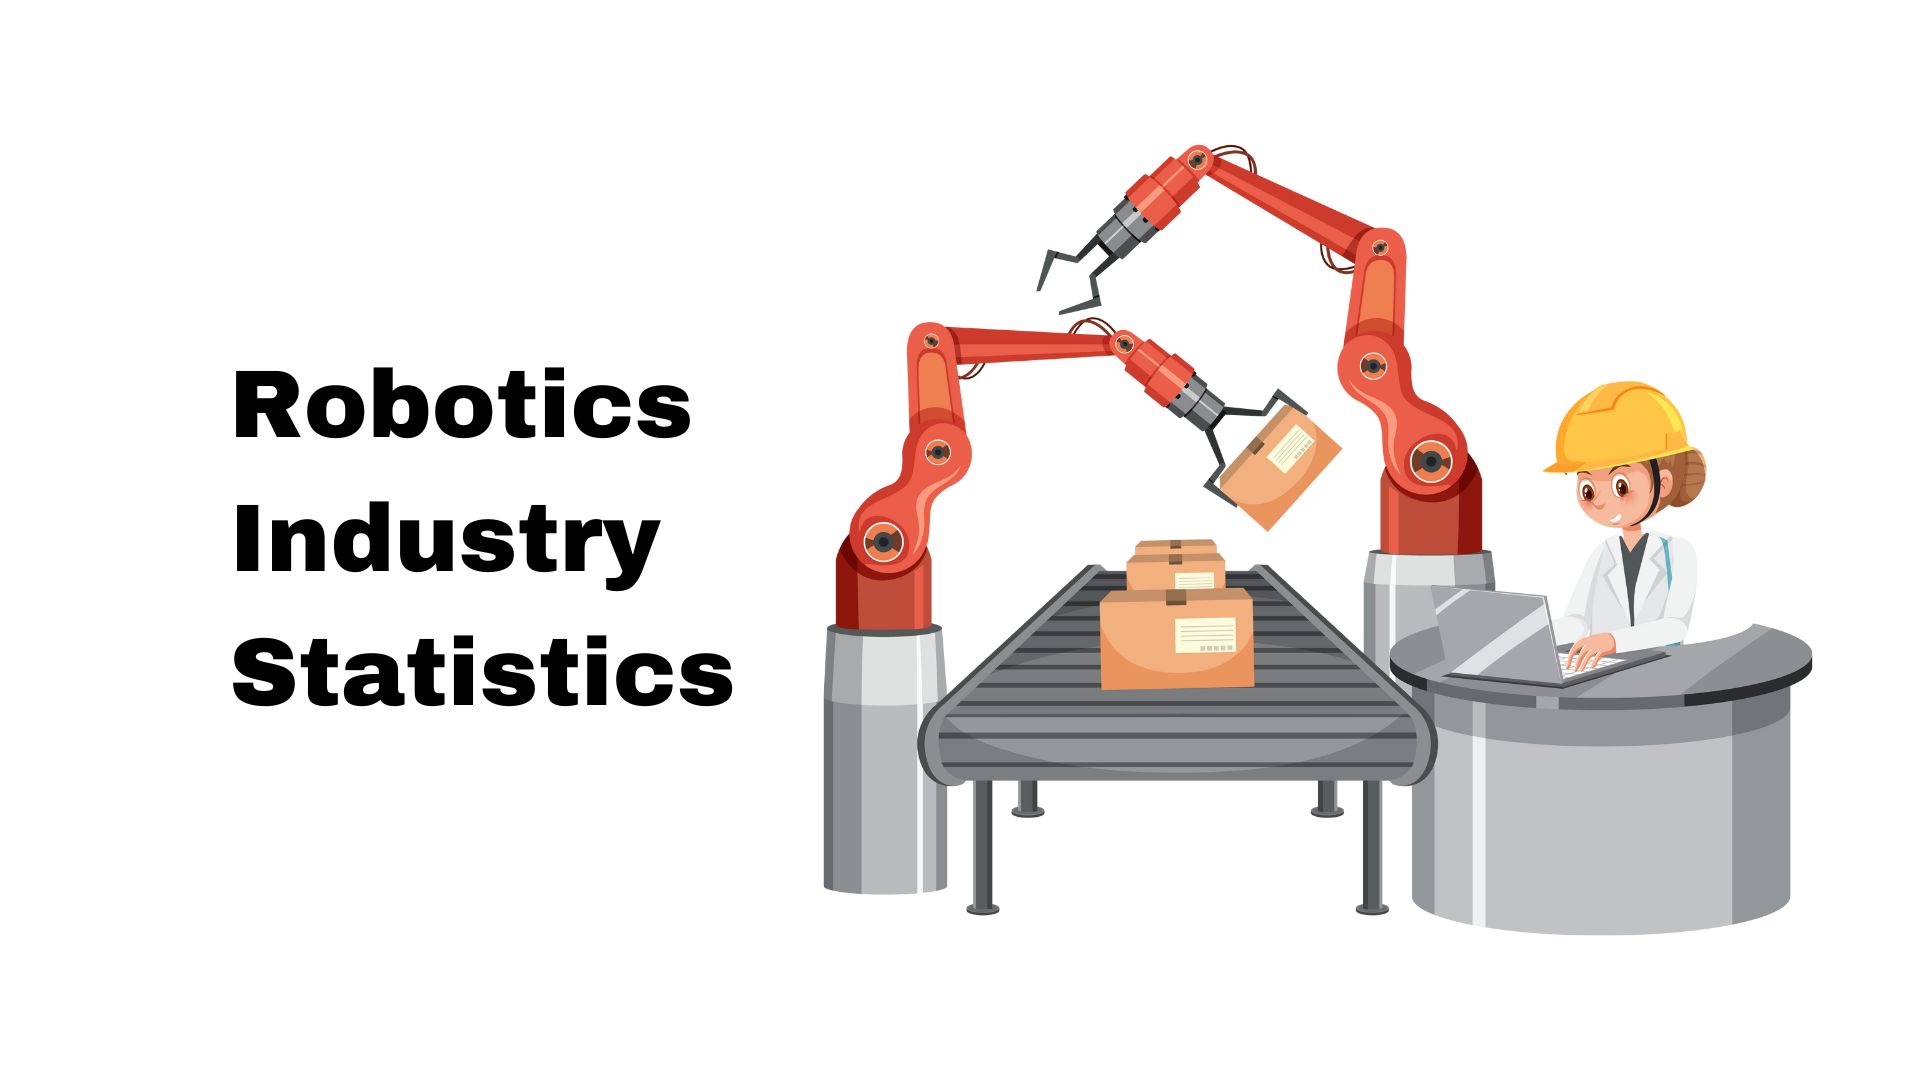 Robotics Industry Statistics By Industry and Facts